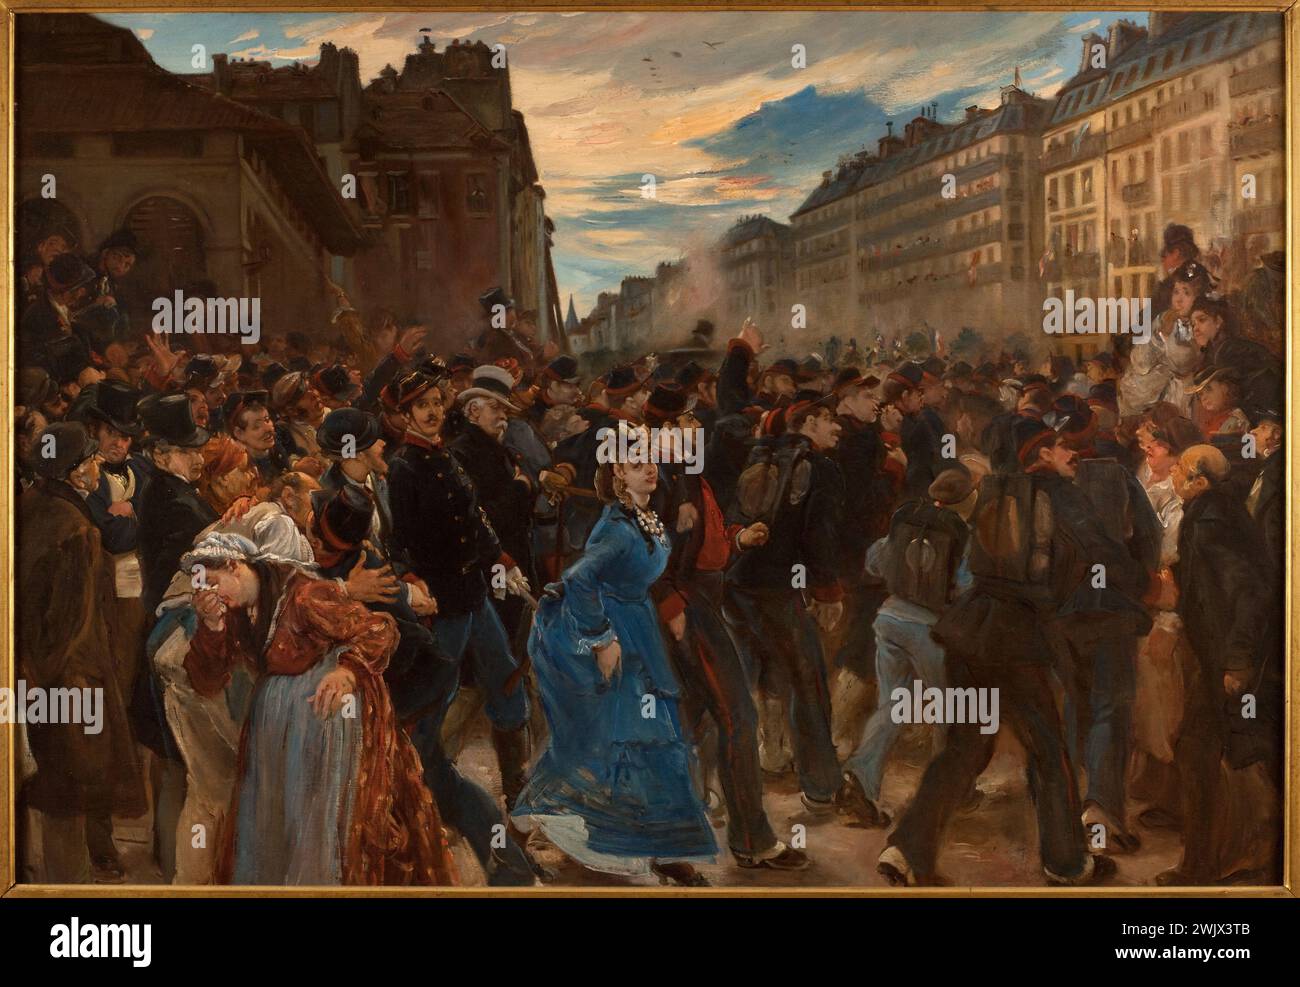 Alfred Dehodencq (1822-1882). The departure of the mobiles, August 1870. Oil on canvas. Paris, Carnavalet museum. Army, blue, conscription, departure, woman, crowd, mobile national guard, war 1870, Franco-German war, soldier, leave, cry, tears, long dress, second empire, soldier, city, 19th XIX 19th 19th 19th 19th century, oil on canvas Stock Photo